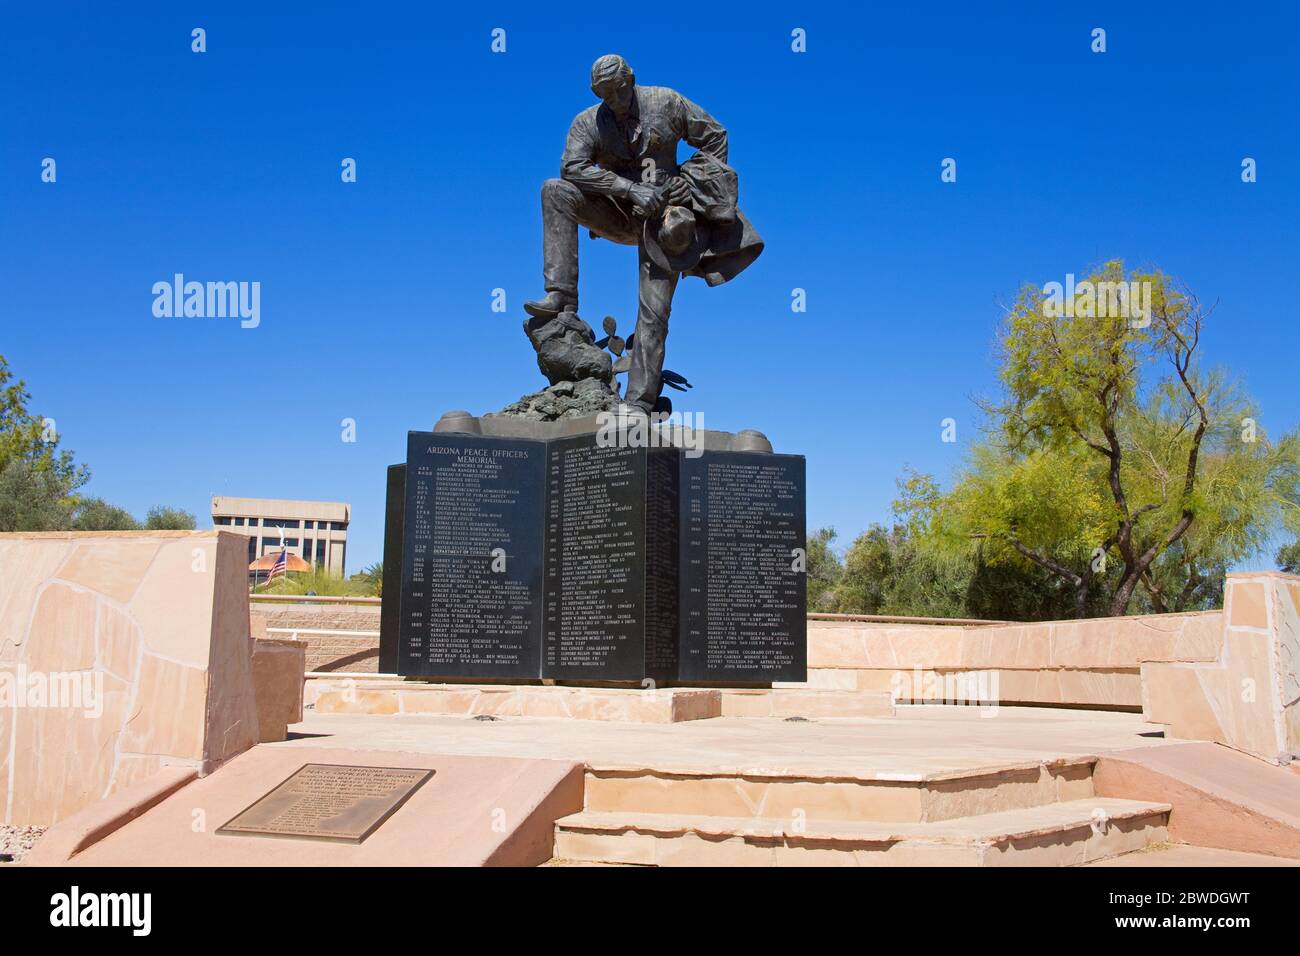 Peace Officers Memorial Day Background Stock Photo by ©tharun15 46030677